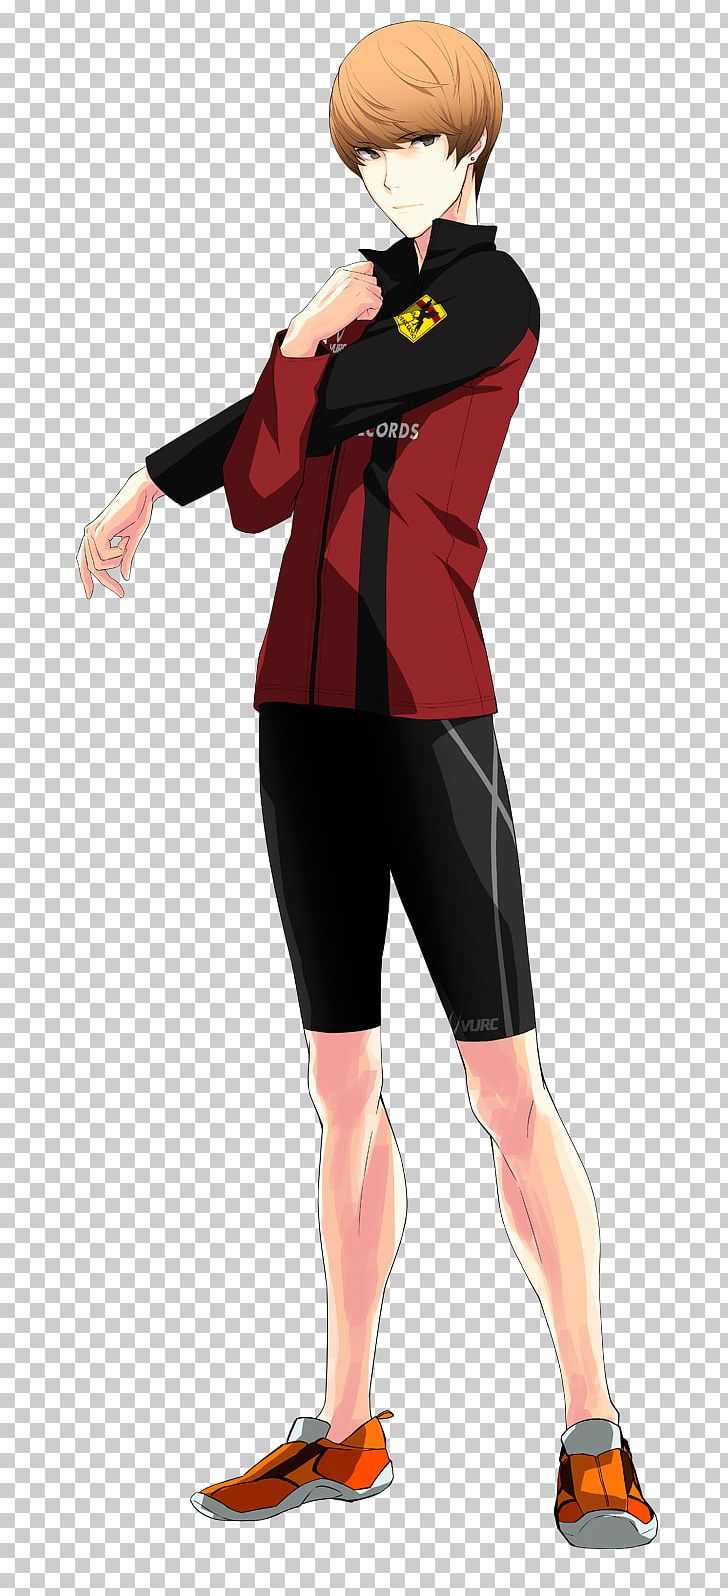 Prince Of Stride Costume Anime Cosplay PNG, Clipart, Anime, Arm, Art, Aura, Cartoon Free PNG Download